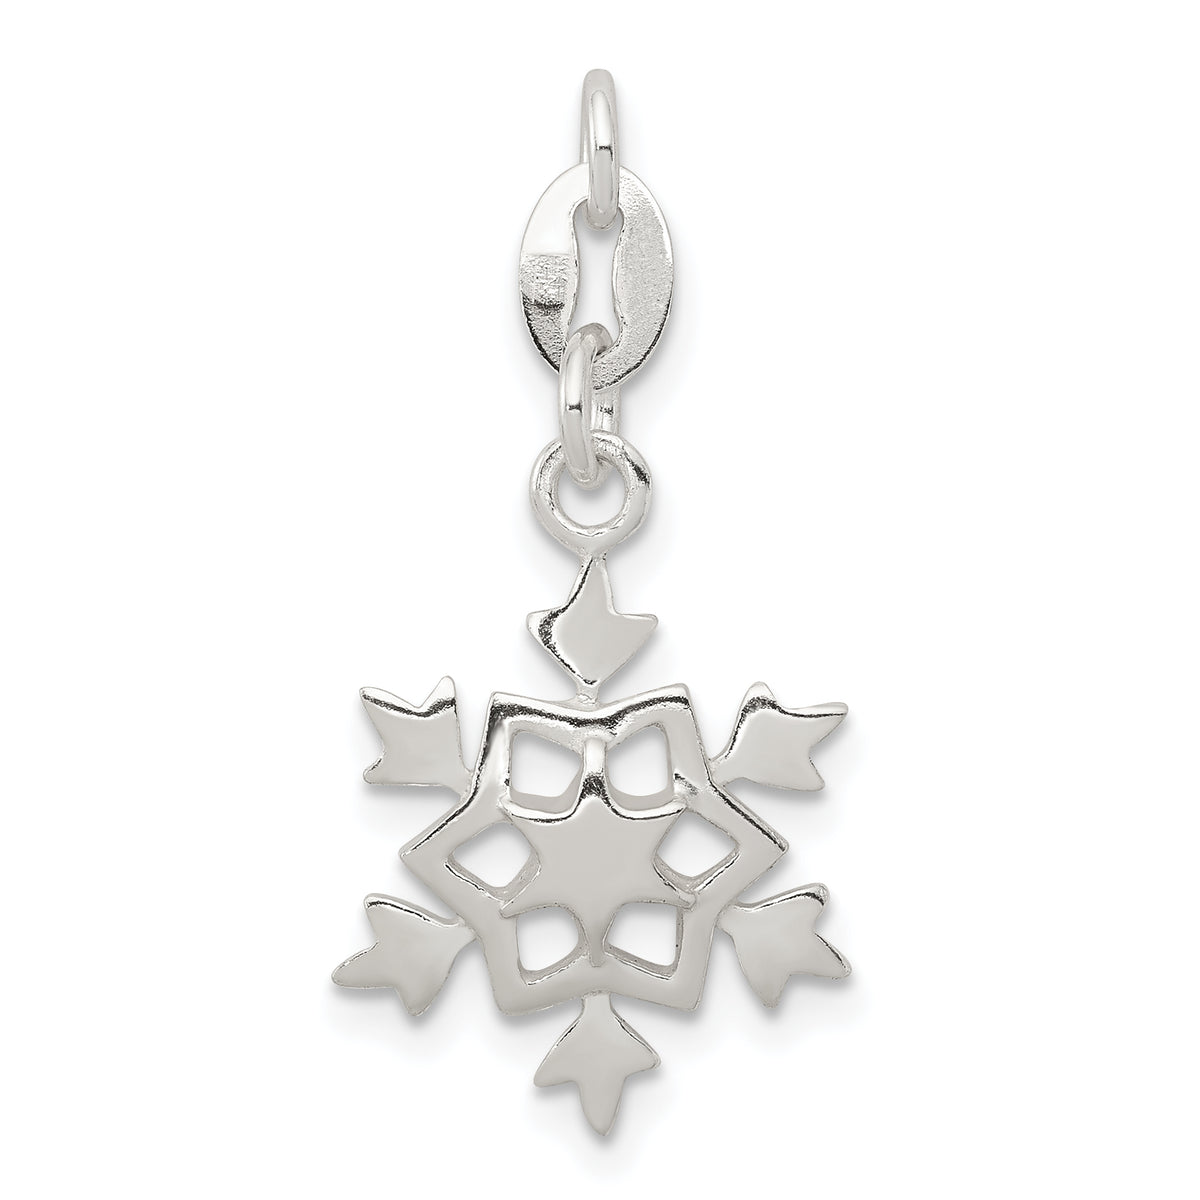 Sterling Silver Polished Snowflake Charm